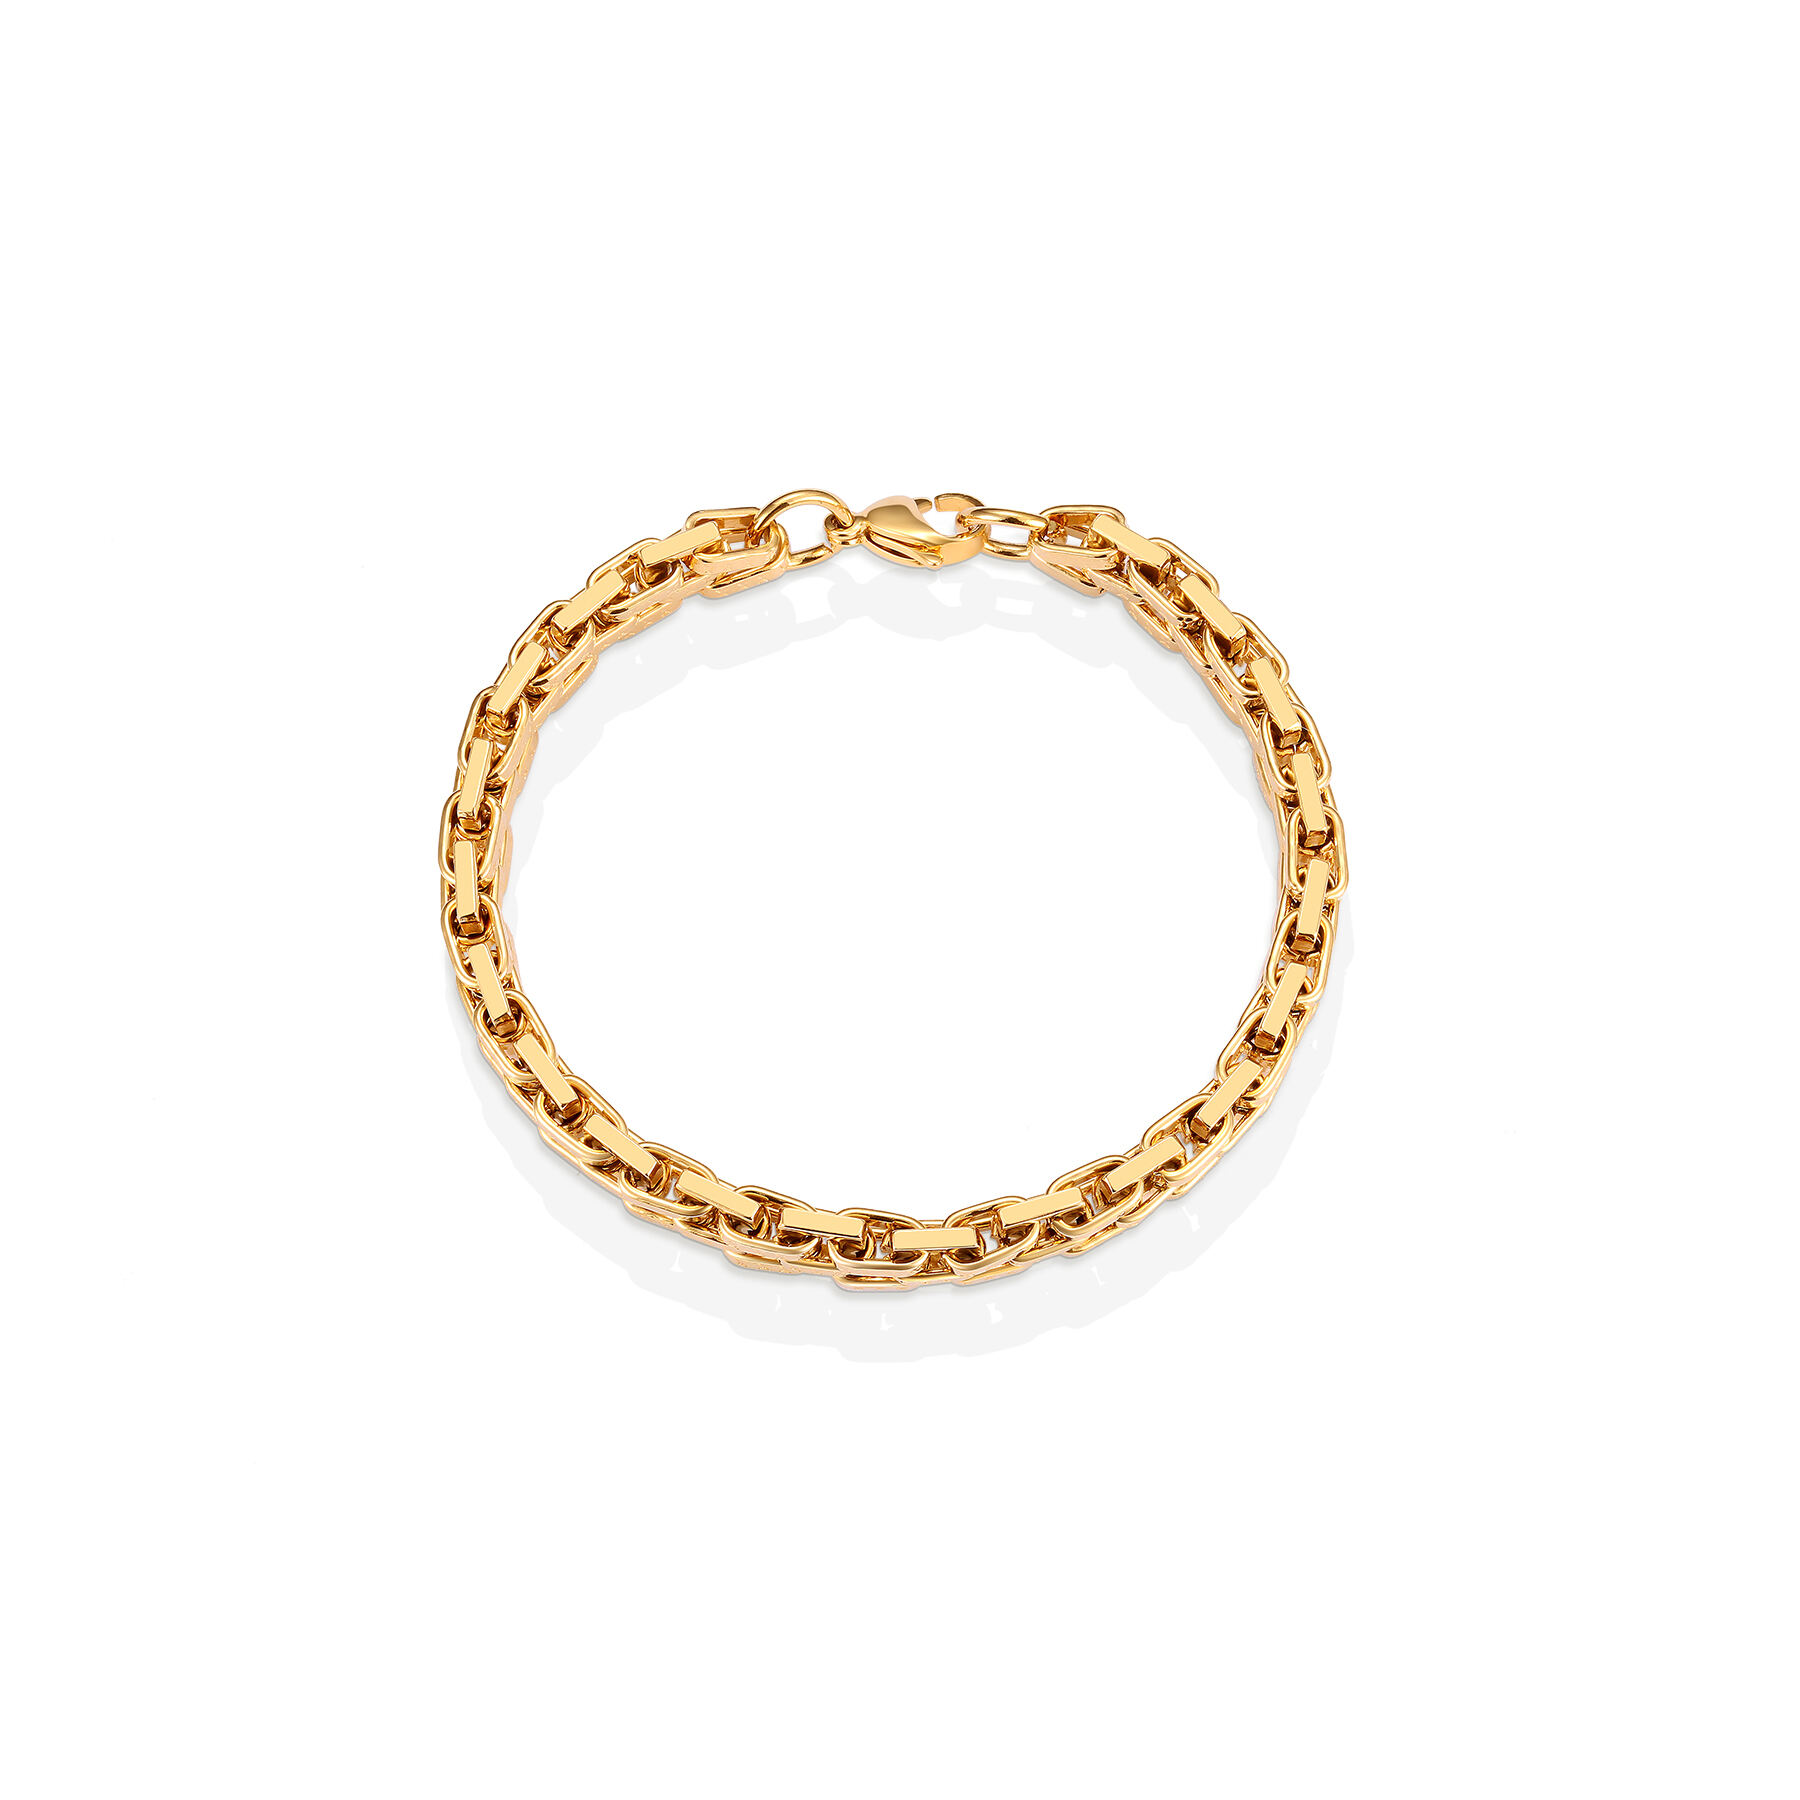 Multi square link chain mens bracelet with 18k gold plating